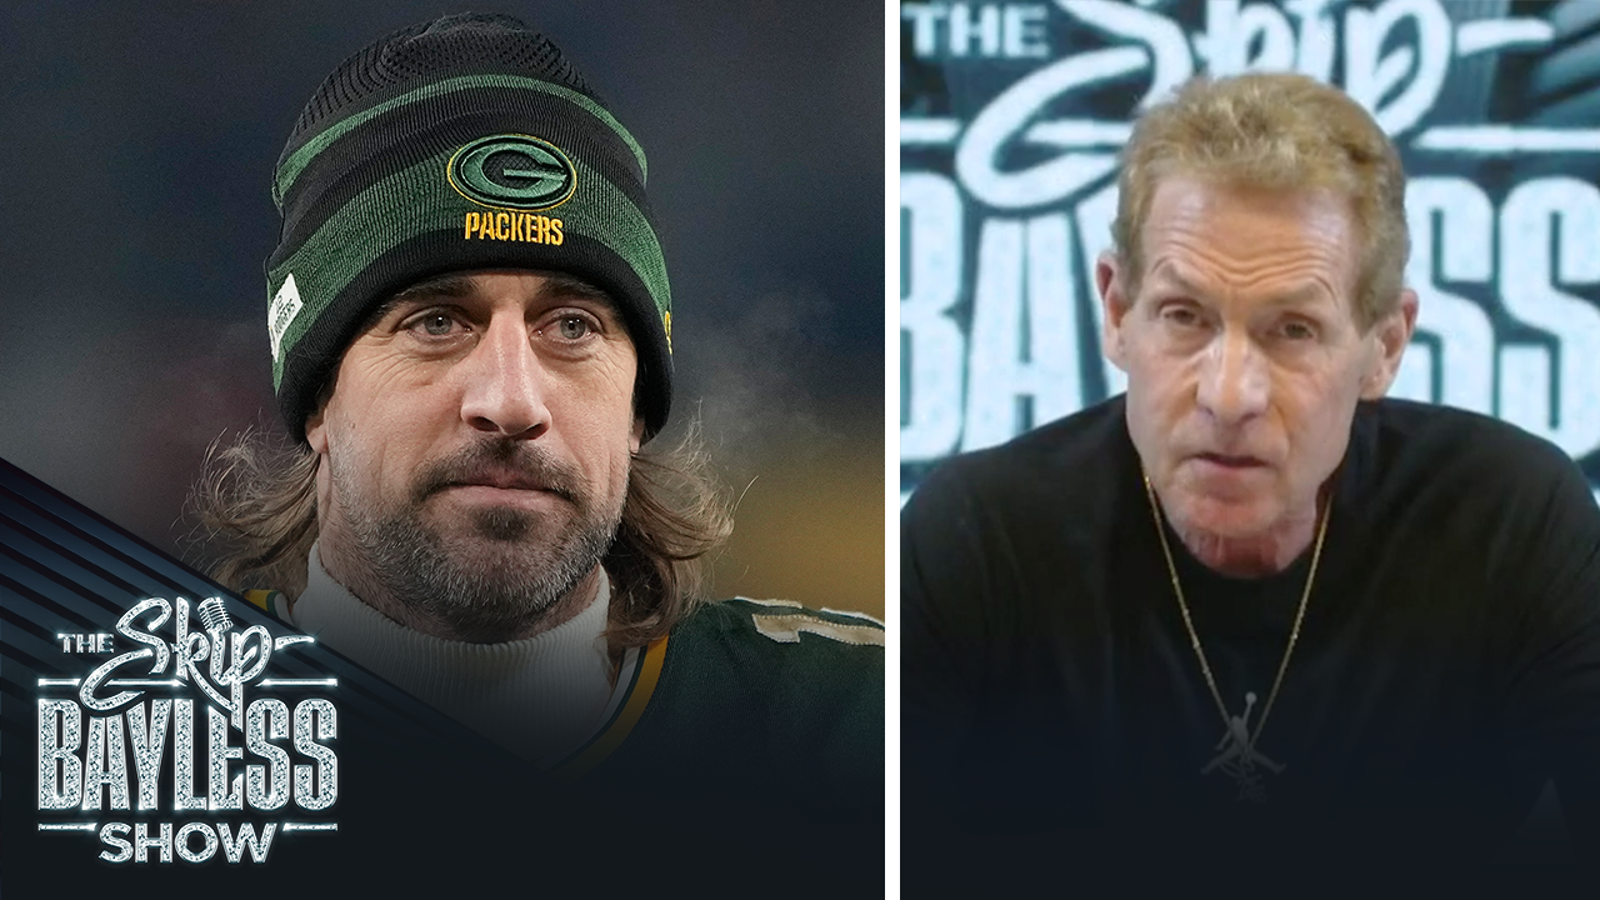 Aaron Rodgers has Packer Nation on its knees